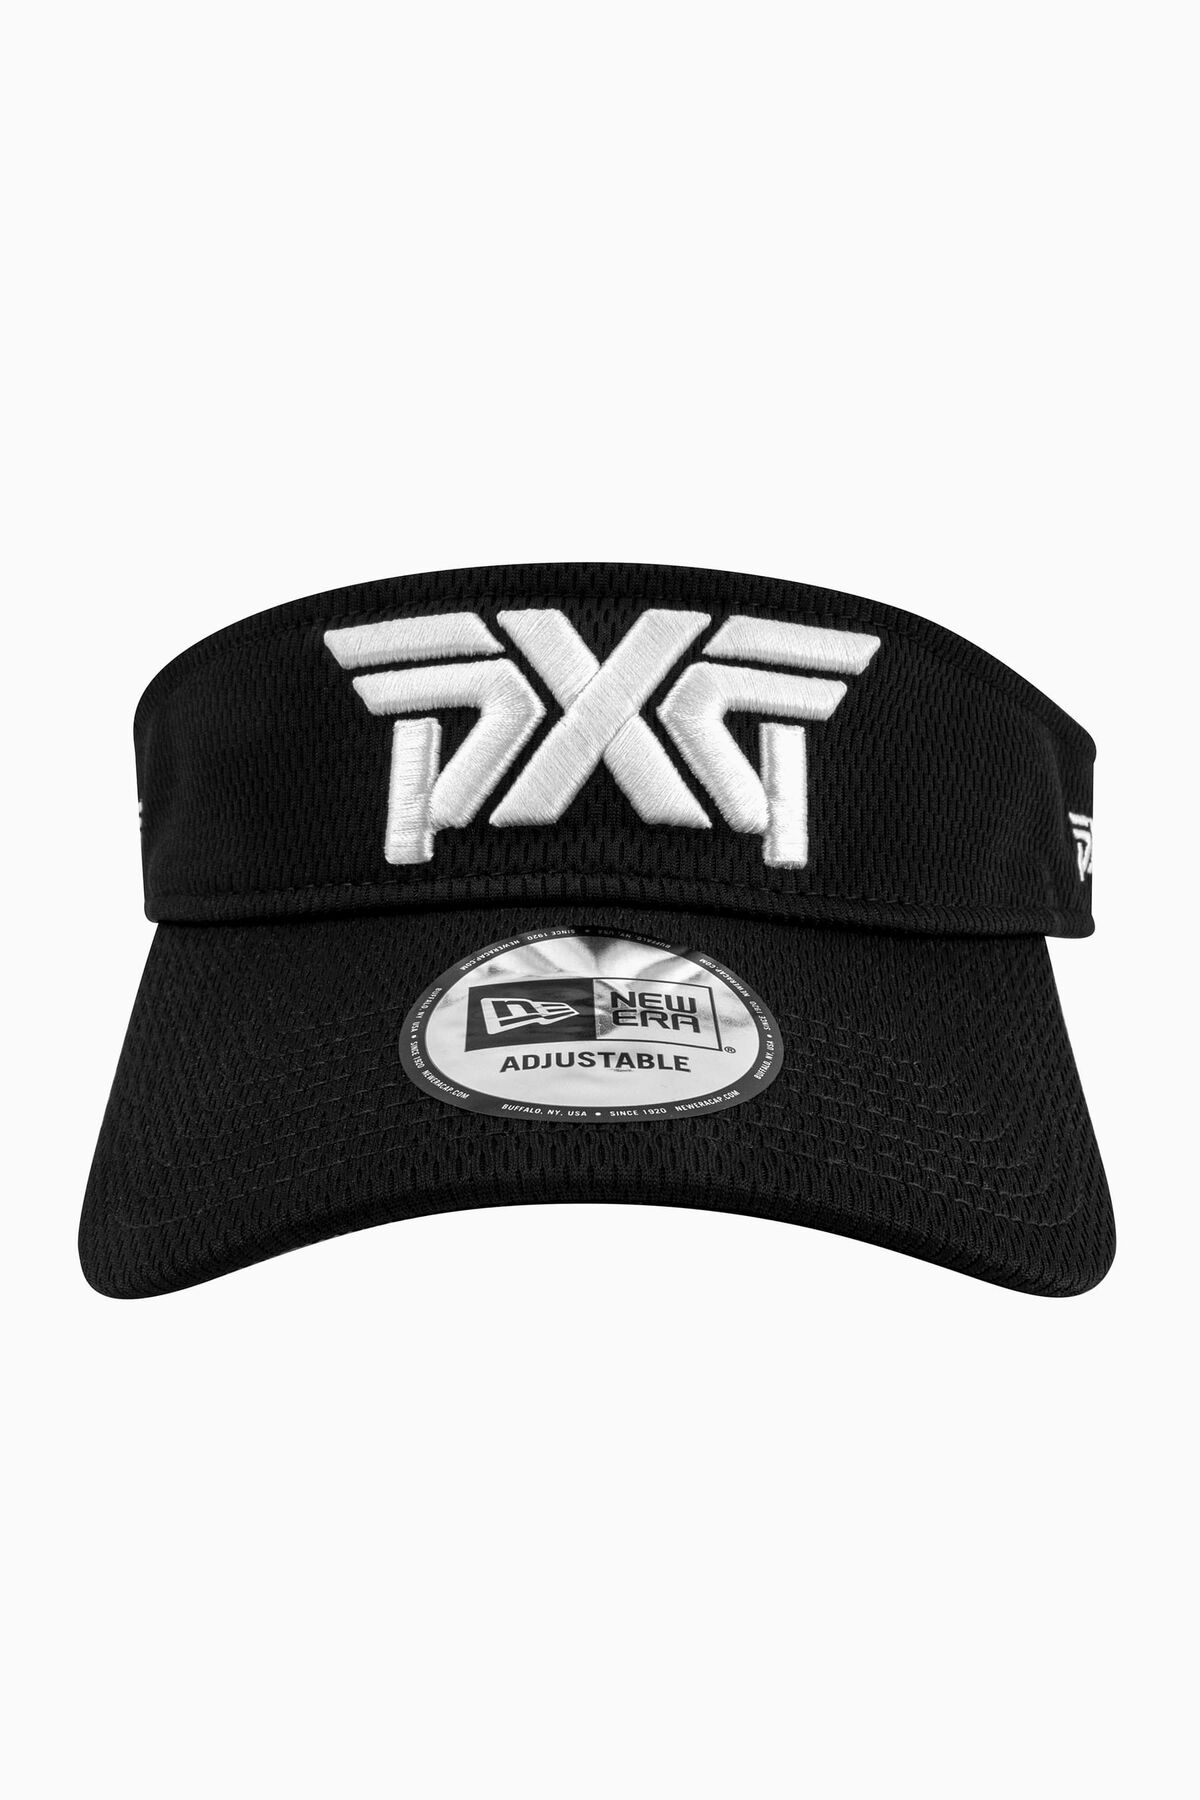 Shop | Golf Gear, Line Clubs and Accessories the PXG Visor Apparel, Quality Golf Performance Sport at Highest